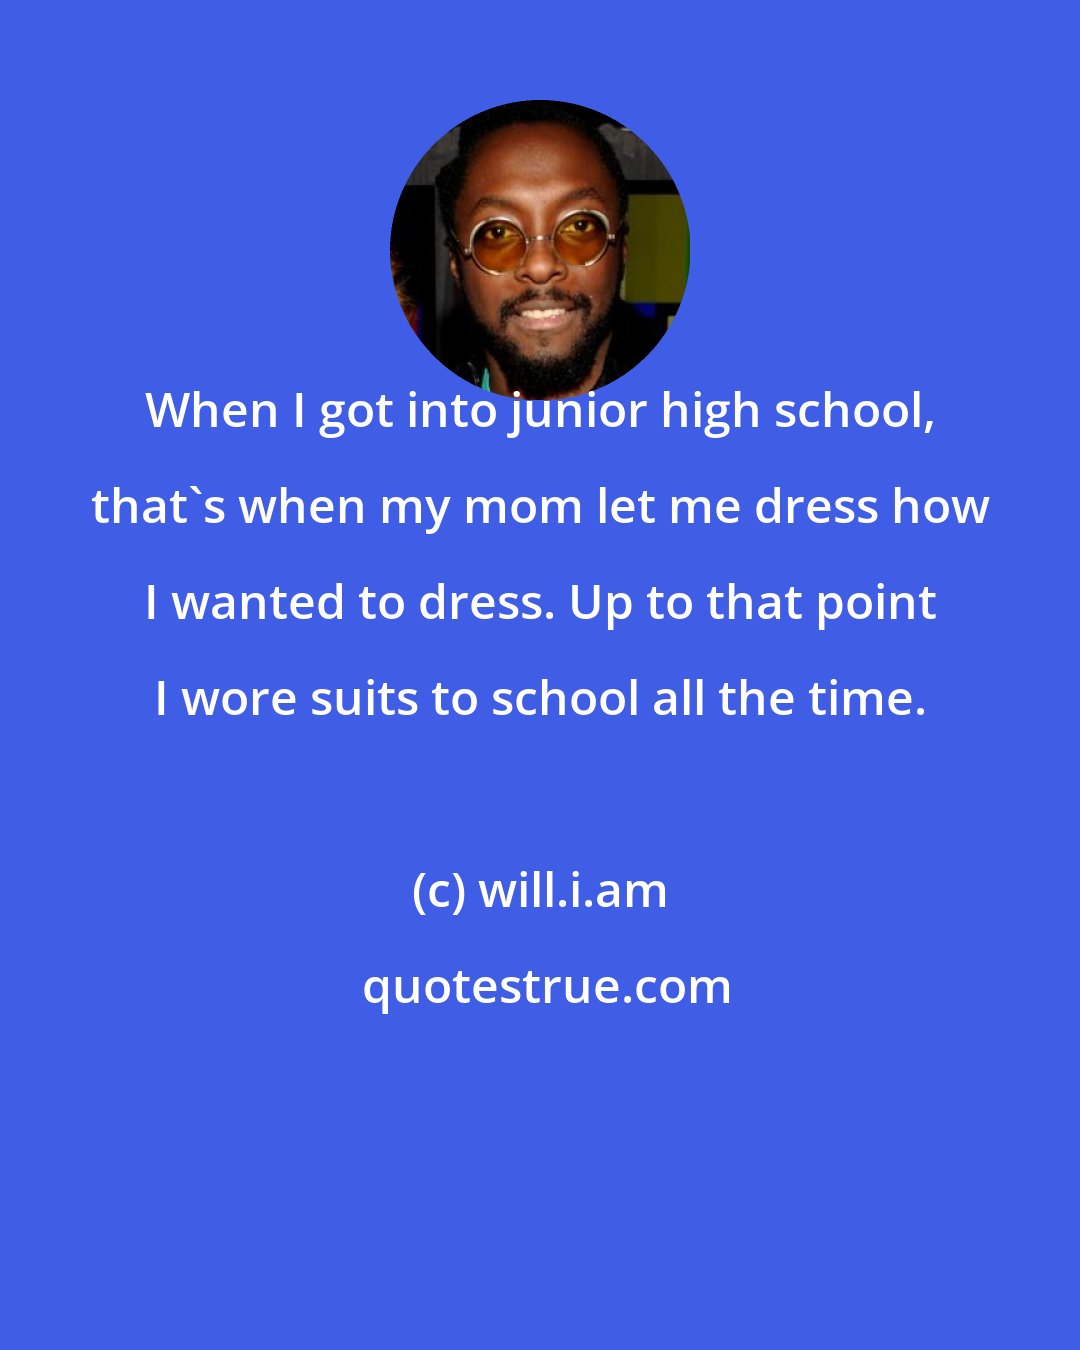 will.i.am: When I got into junior high school, that's when my mom let me dress how I wanted to dress. Up to that point I wore suits to school all the time.